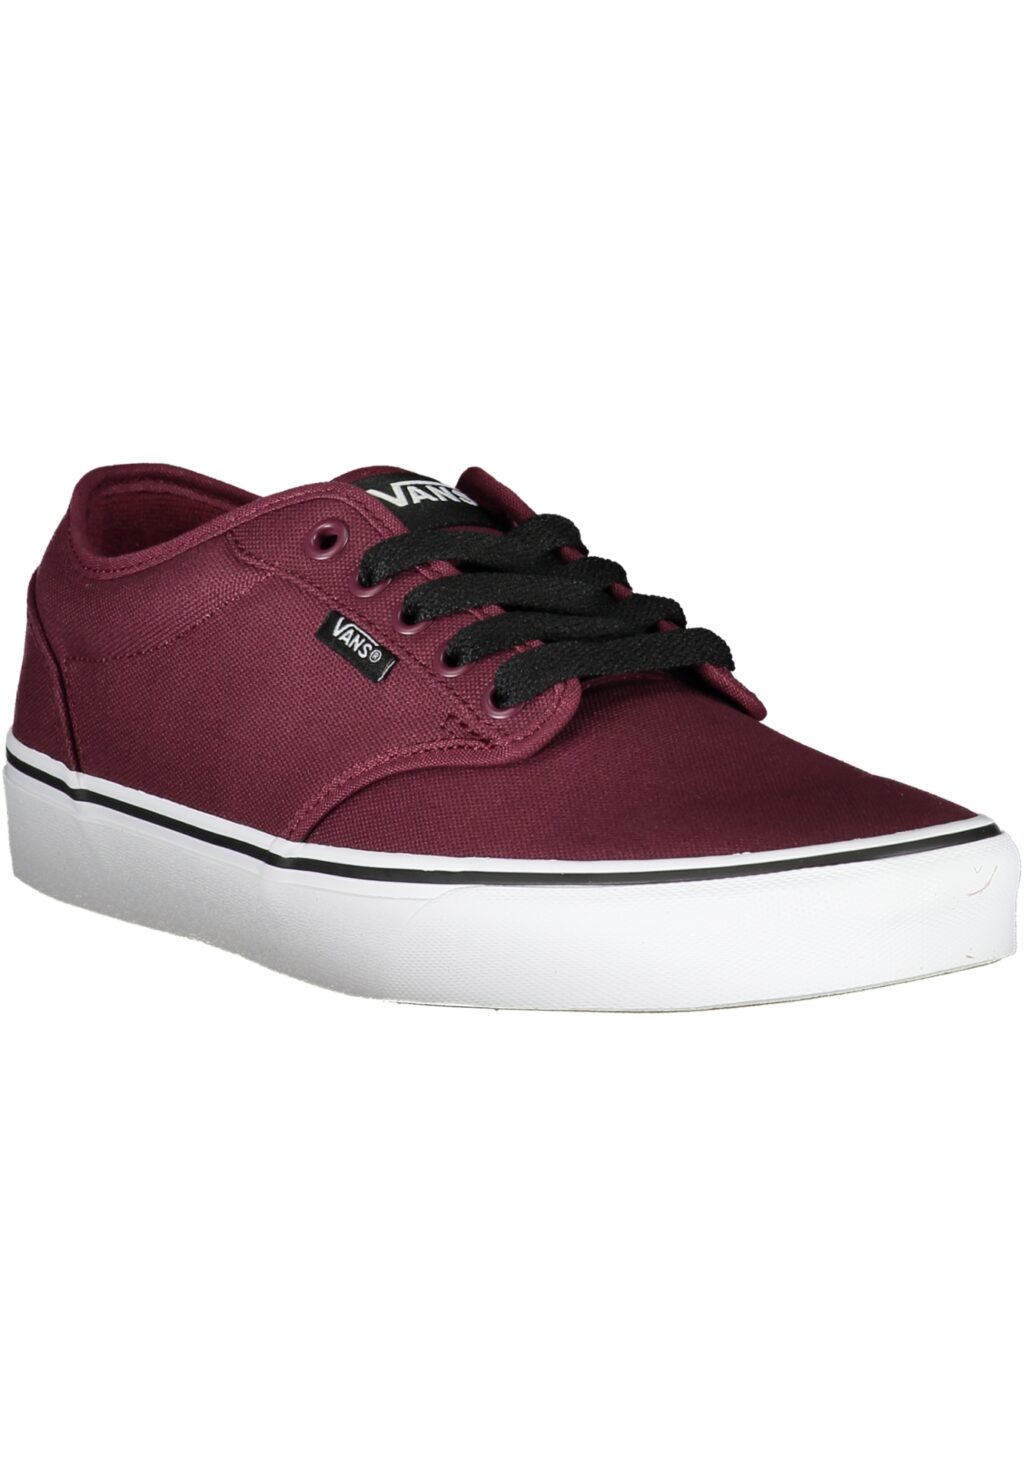 VANS RED MEN'S SPORTS SHOES VN000TUY_RO8J3